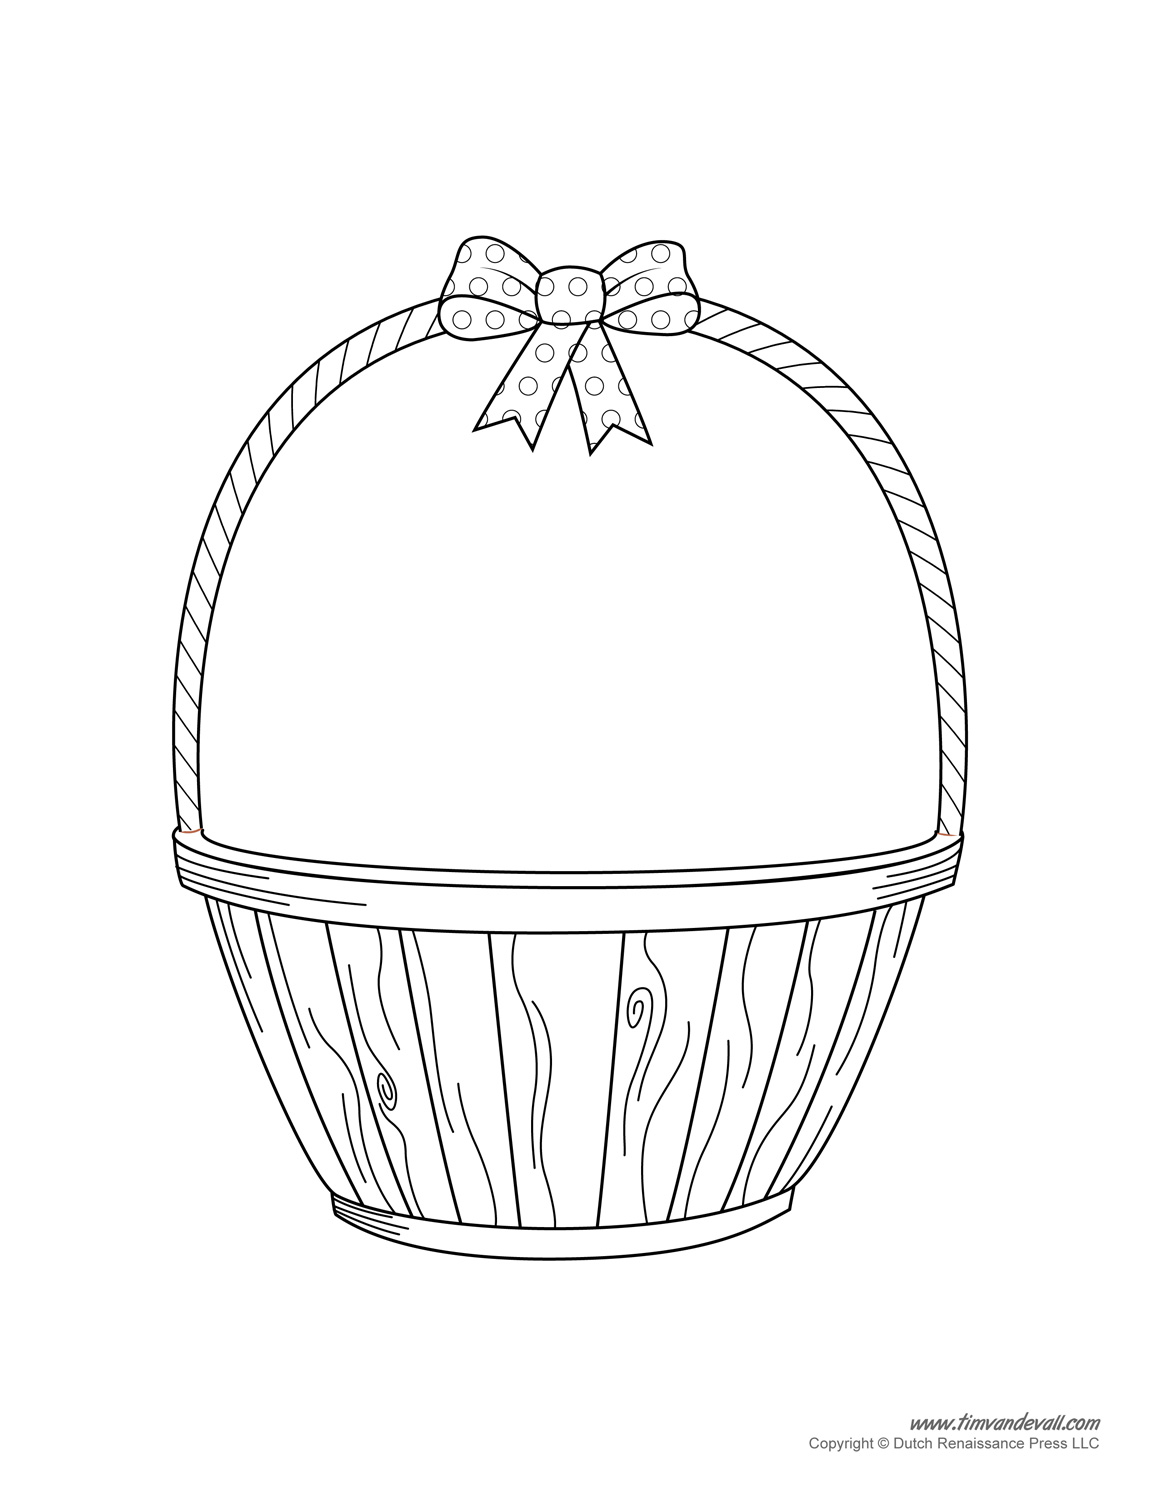 Free Basket Black And White Clipart, Download Free Clip Art.